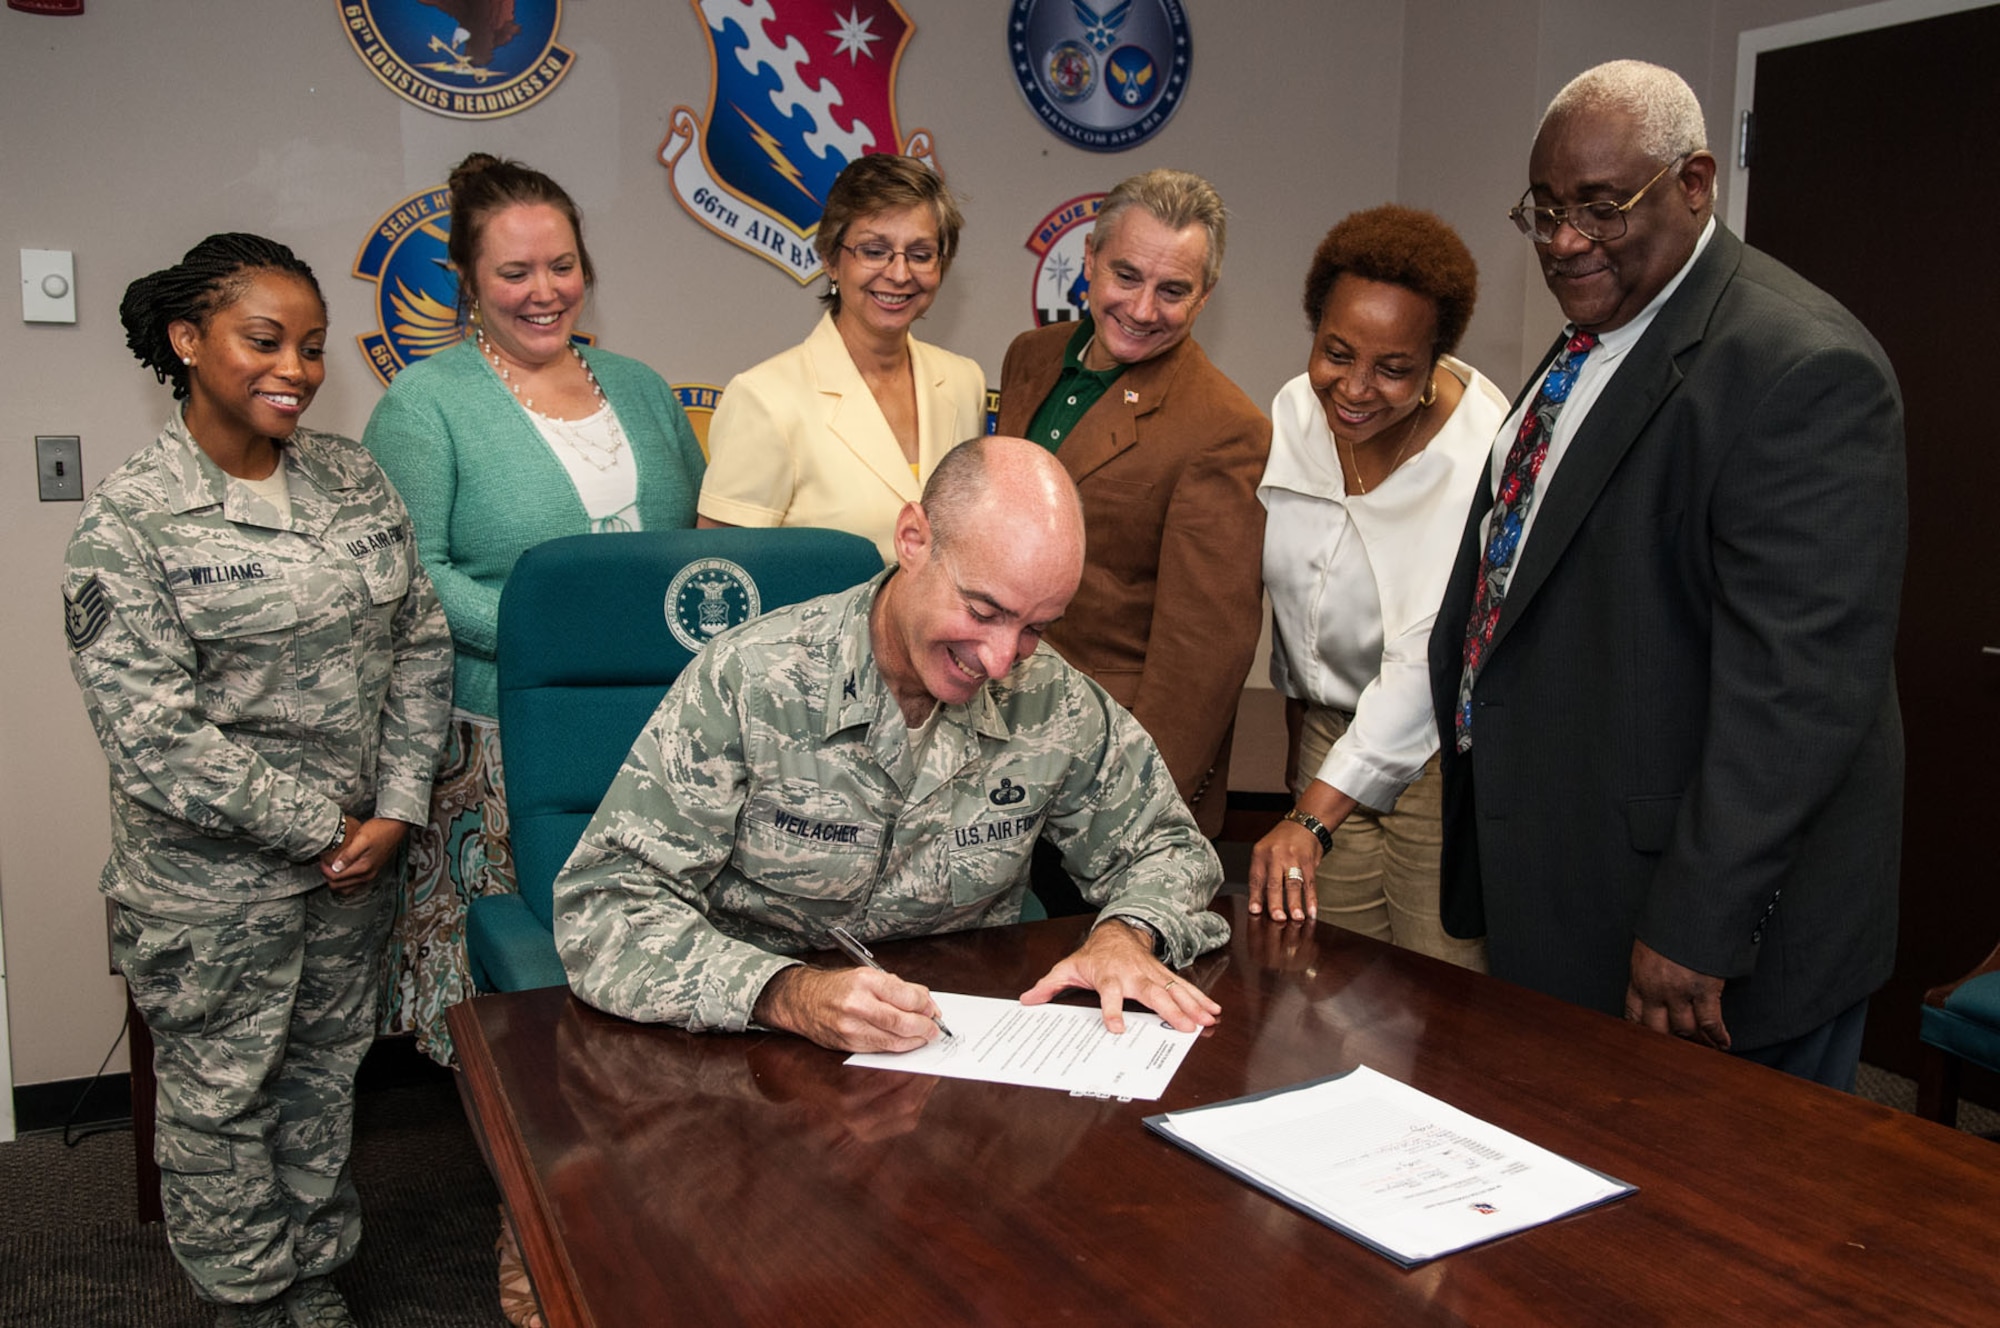 HANSCOM AIR FORCE BASE, Mass. – Col. Lester A. Weilacher (seated), 66th Air Base Group commander, signs a Special Emphasis Program document in the commander’s conference room Aug. 28 as members of the Equal Opportunity office and SEP managers gather around. The Equal Opportunity office recently reignited SEP to implement creative approaches to recruitment, employment, placement and training in groups who are less represented based on the Civil Rights Act of 1964. (U.S. Air Force photo Rick Berry)